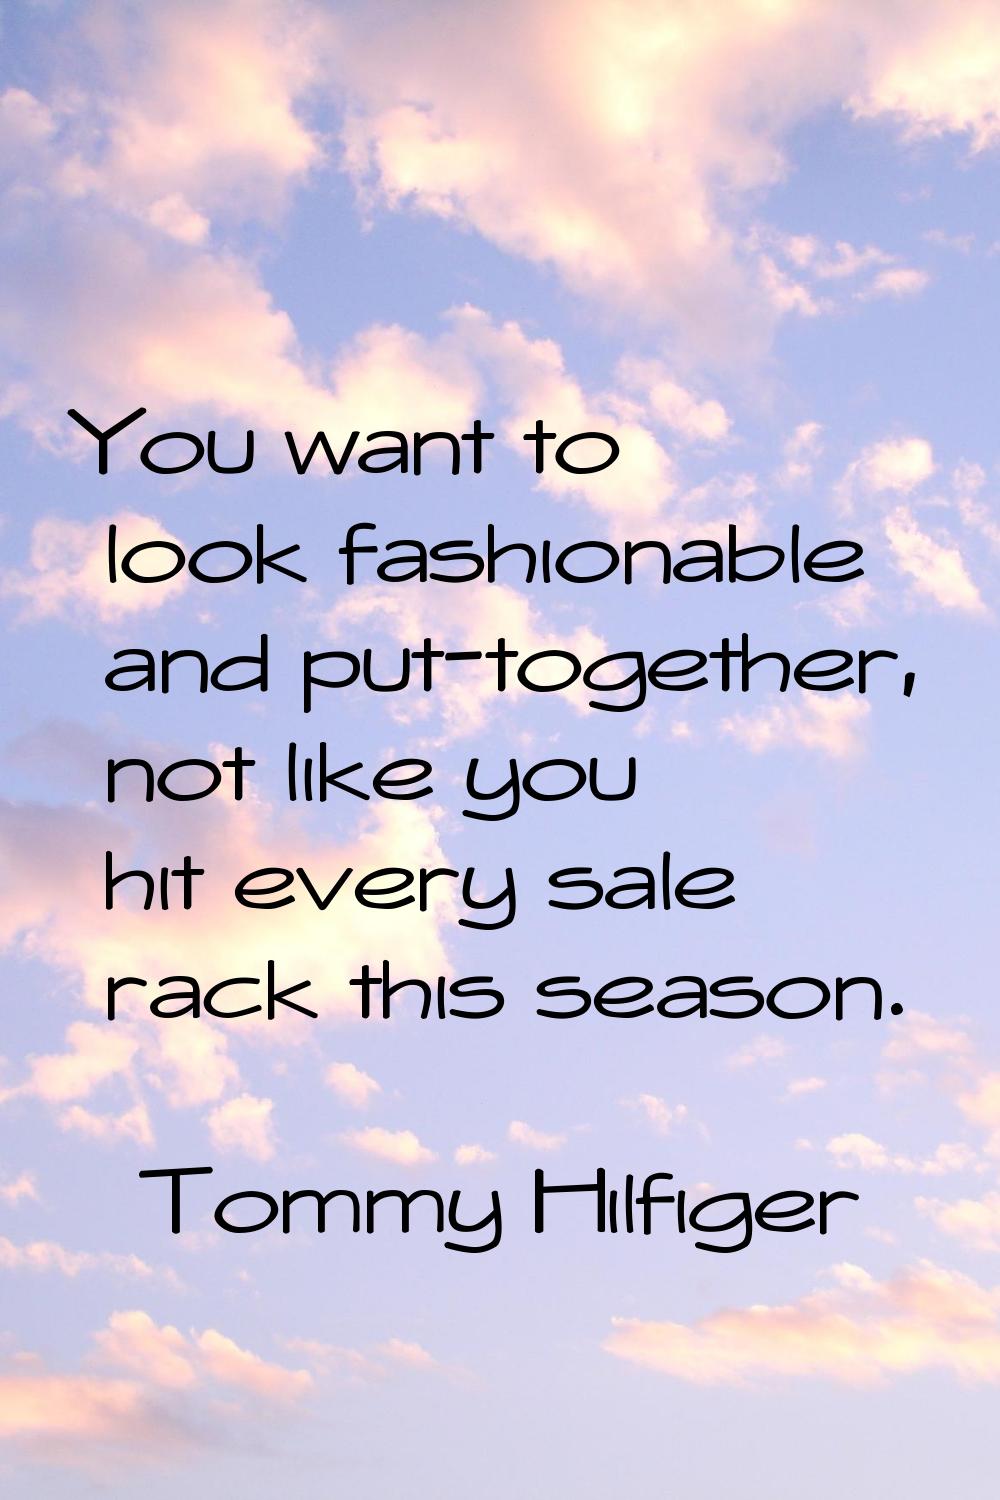 You want to look fashionable and put-together, not like you hit every sale rack this season.